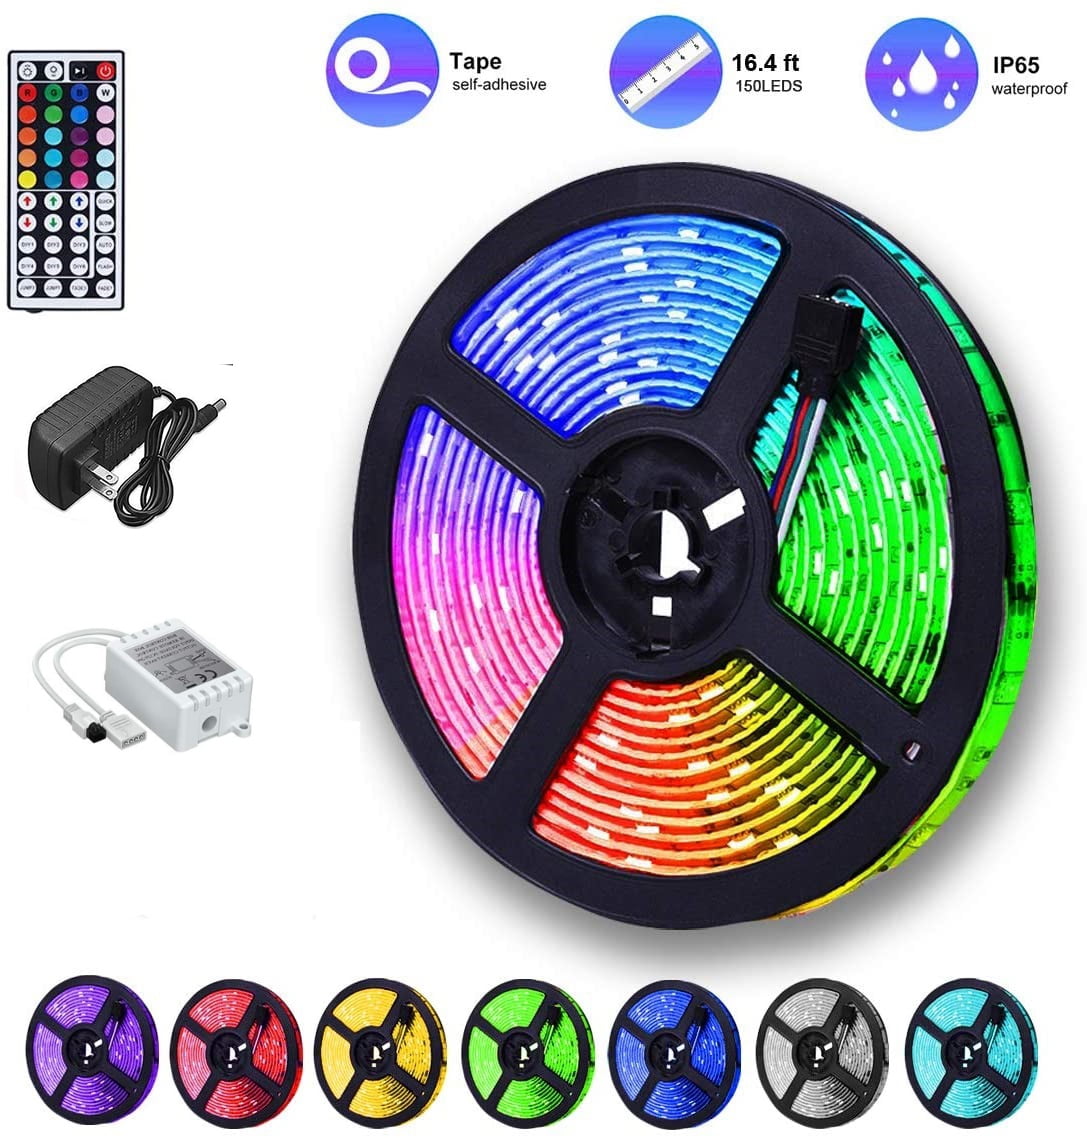 Details about   LED Strip Waterproof Fita Lights 12V Flexible Tape W/ Controller and Adapter New 